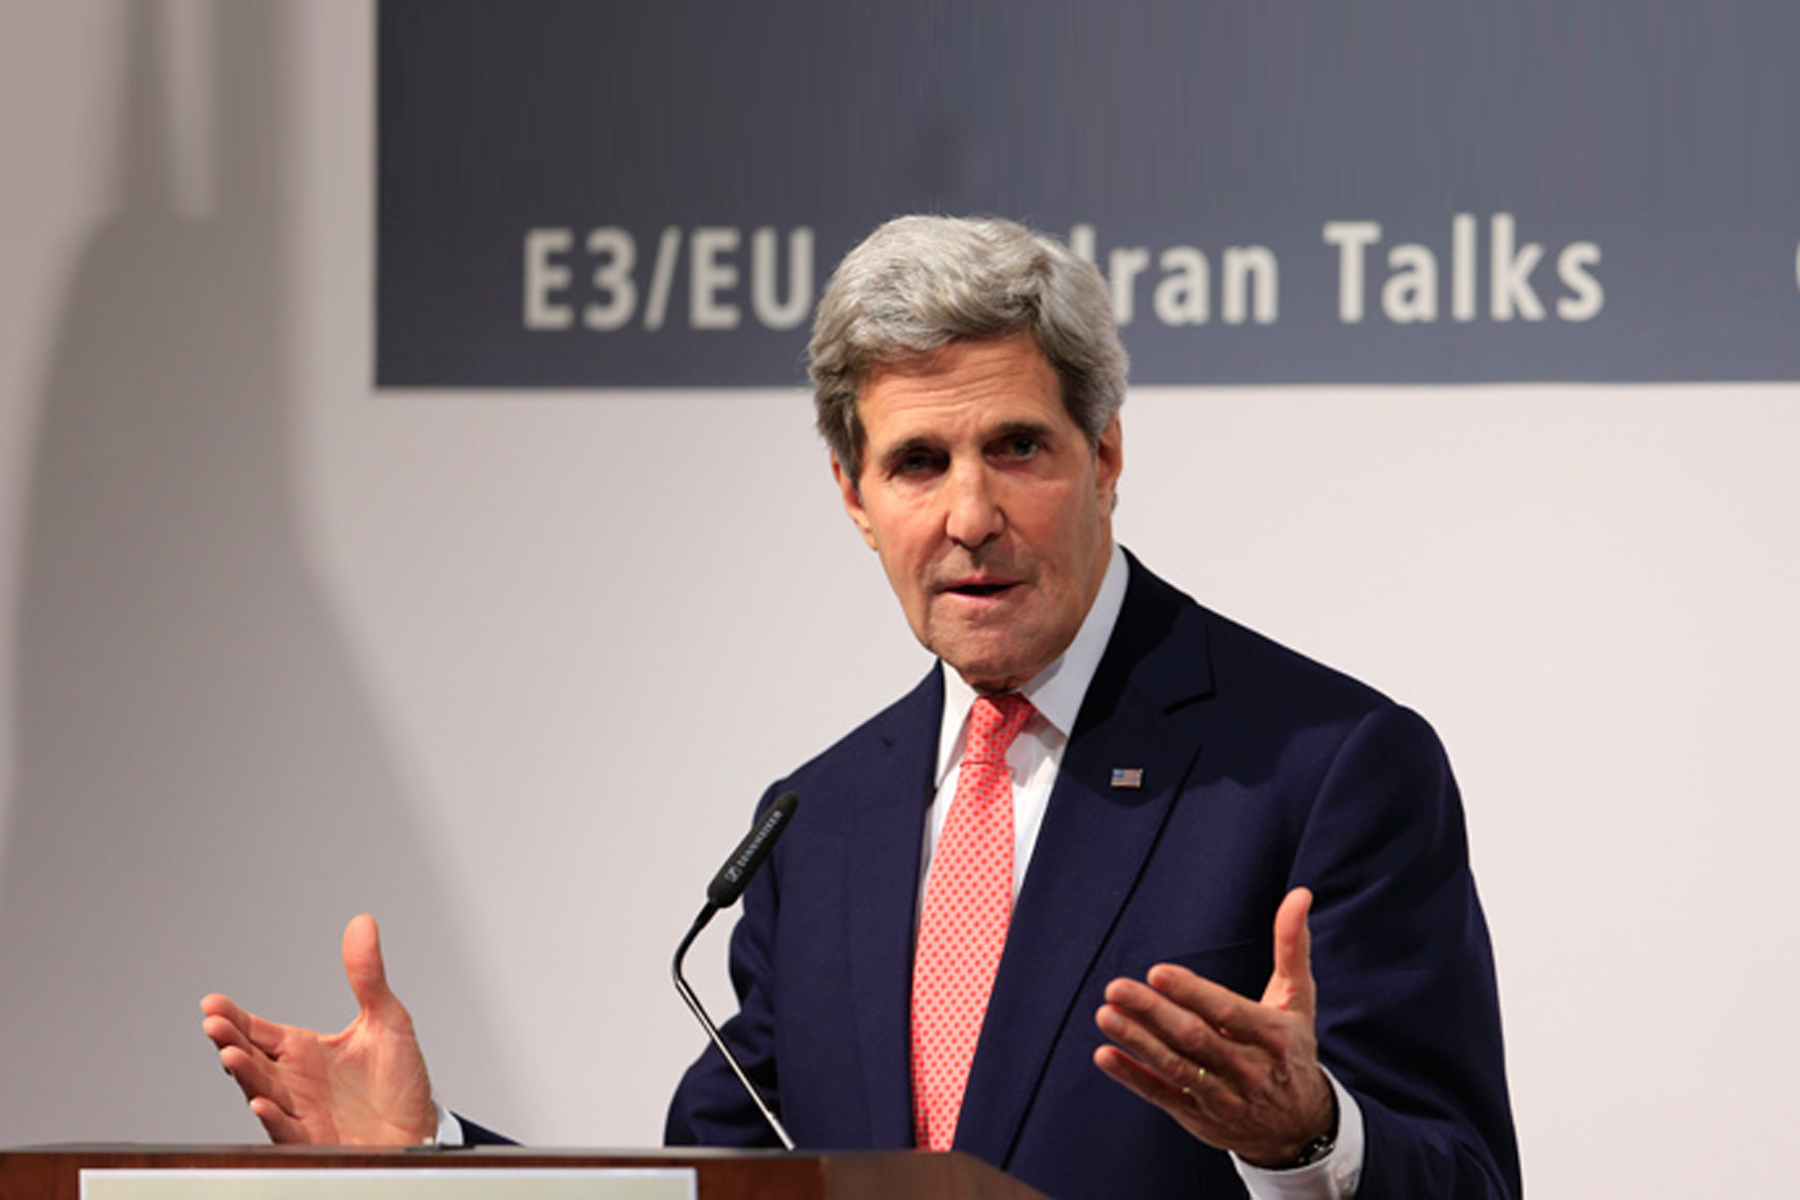 Kerry assures better times for tea trade with Iran